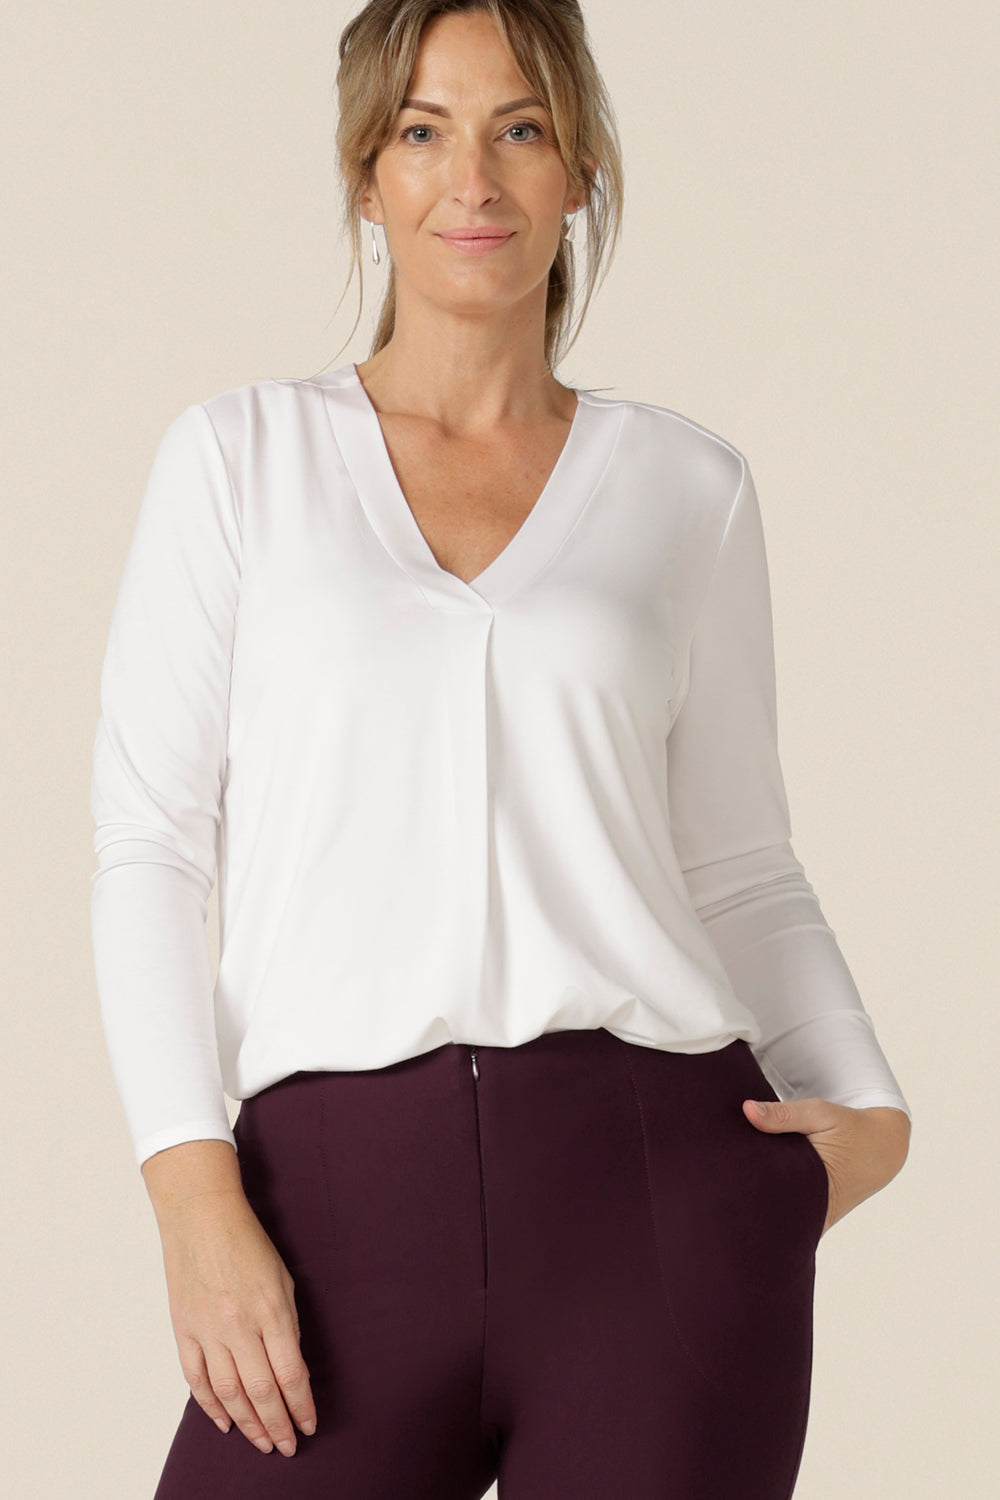 A great top for work or casual wear, this long sleeve, V-neck top in white bamboo is a clothing essential that will match with your capsule wardrobes. Made in Australia by Australian and New Zealand women's clothing brand, L&F.